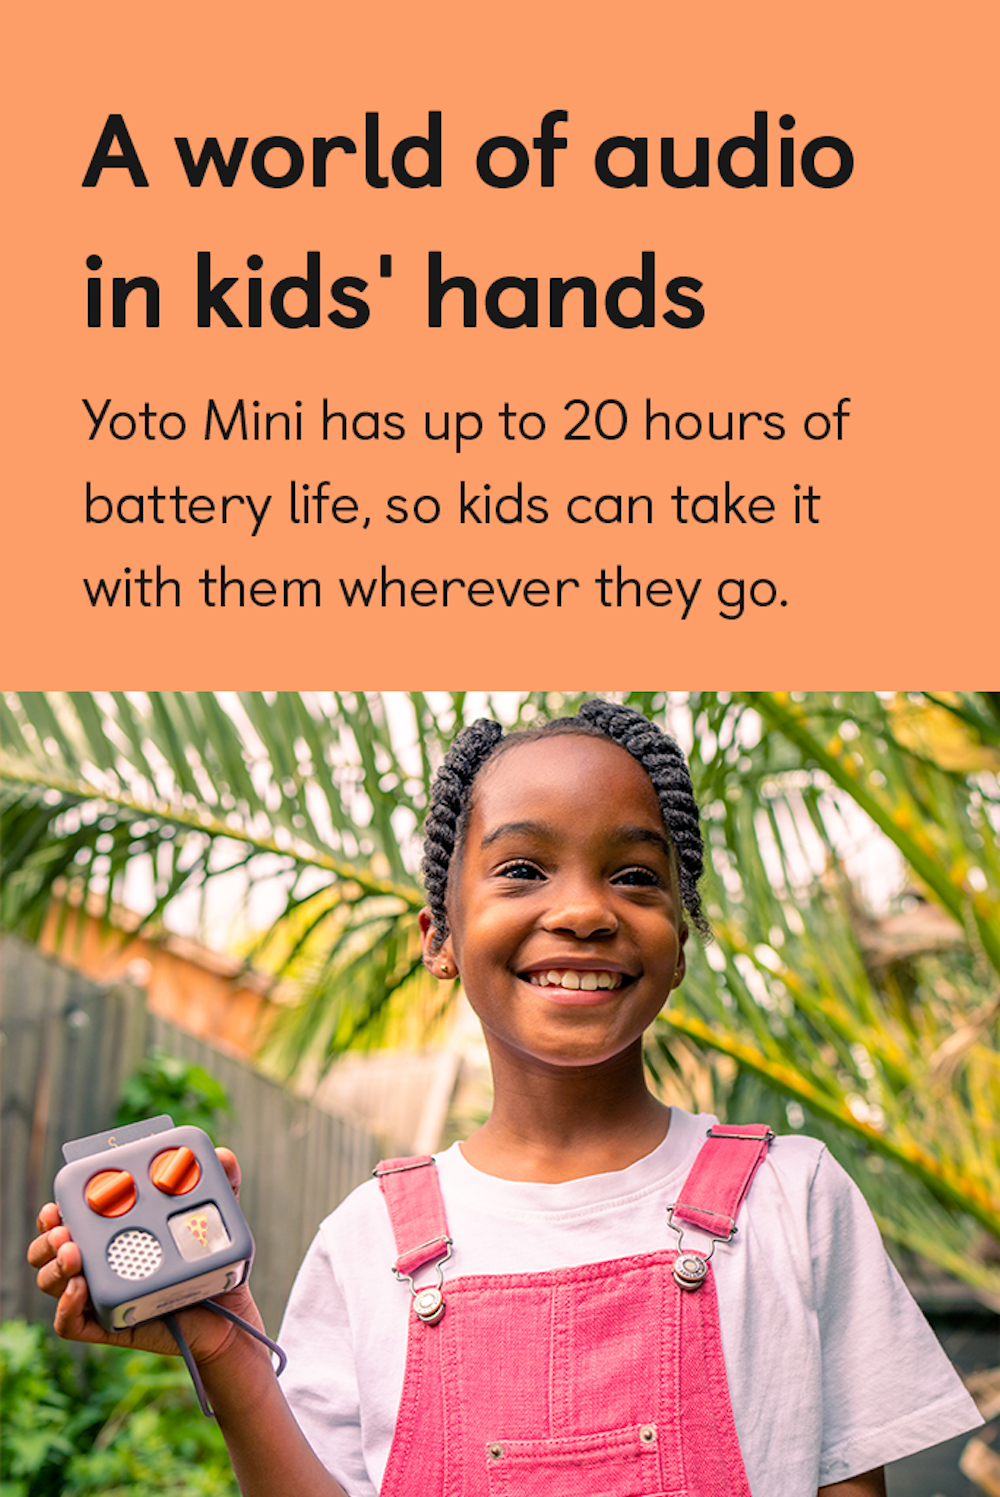 A world of audio in kids' hands. Yoto Mini has up to 20 hours of battery life, so kids can take it with them wherever they go.